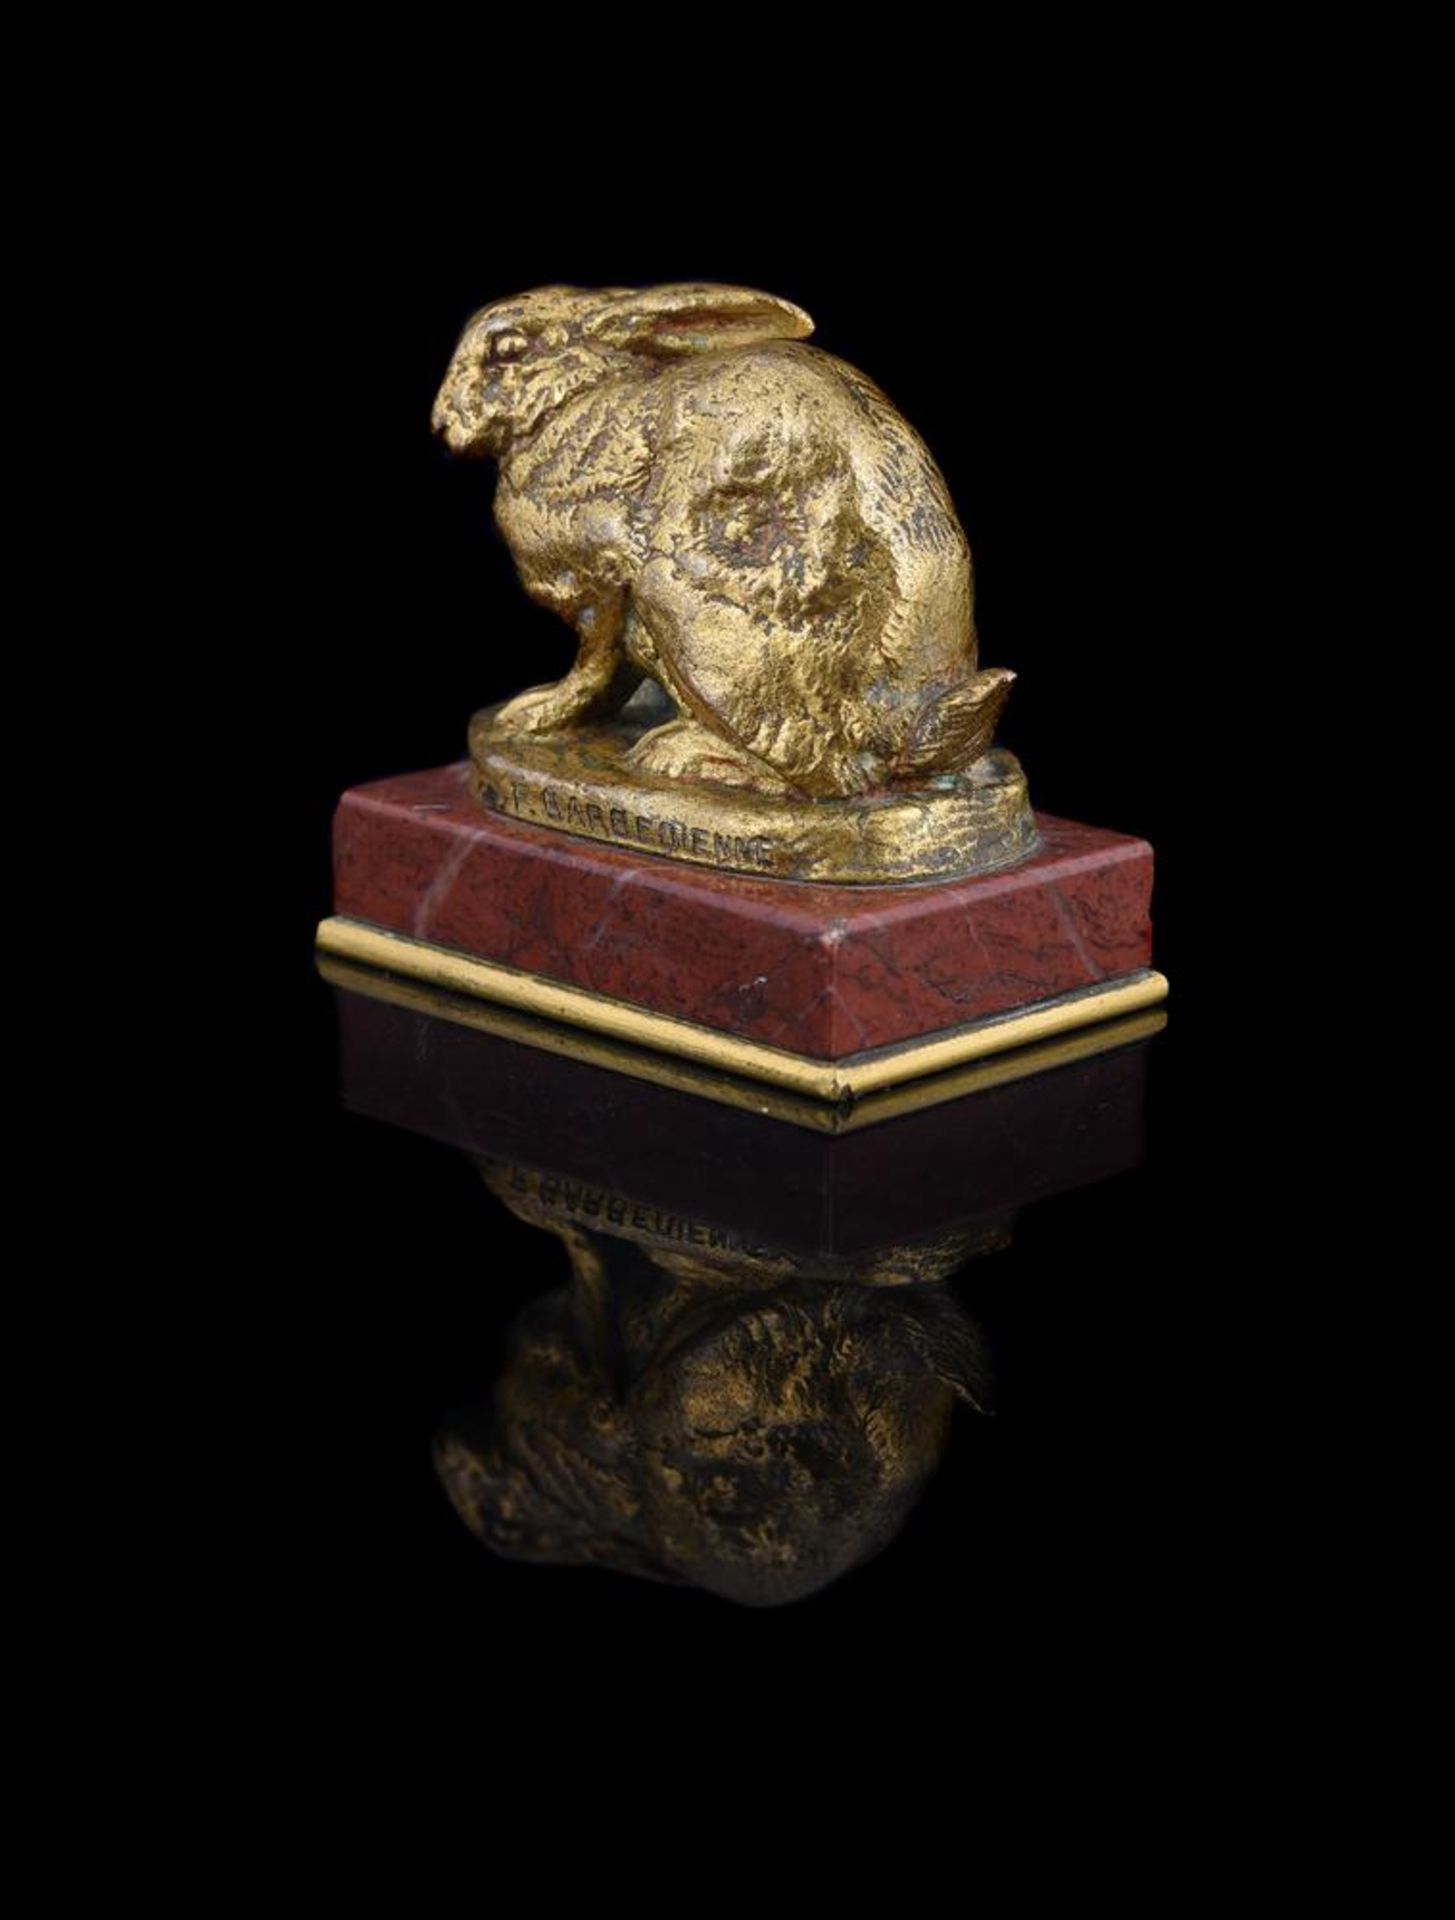 ANTOINE-LOUIS BARYE (FRENCH, 1795-1875), A GILT BRONZE MODEL OF A CROUCHING RABBIT - Image 6 of 7